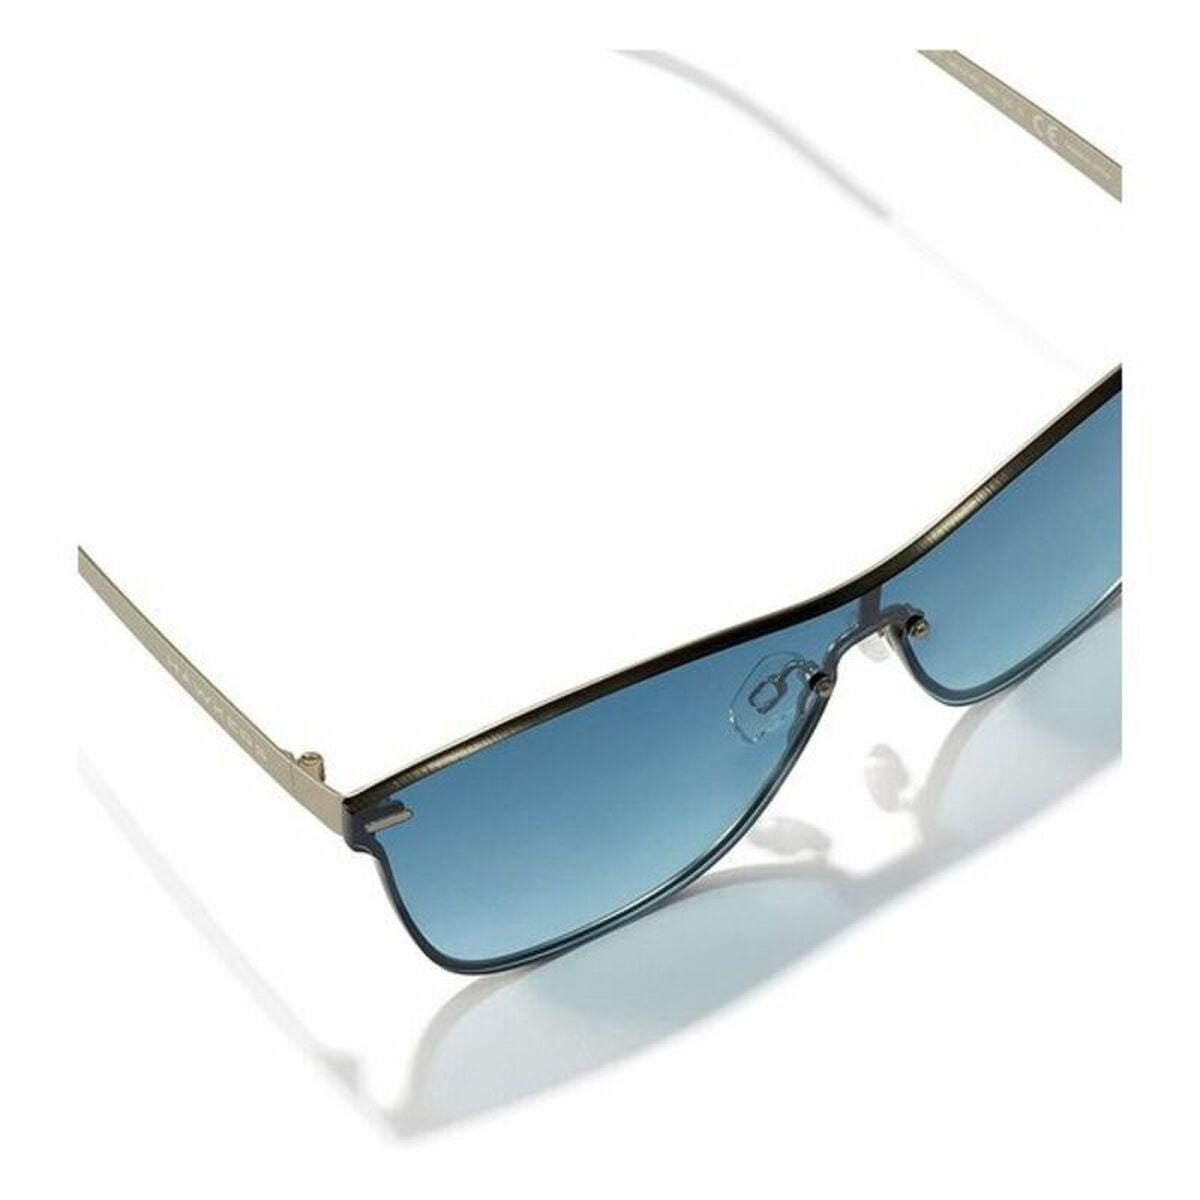 Unisex Sunglasses One Venm Metal Hawkers HOVM20DLM0